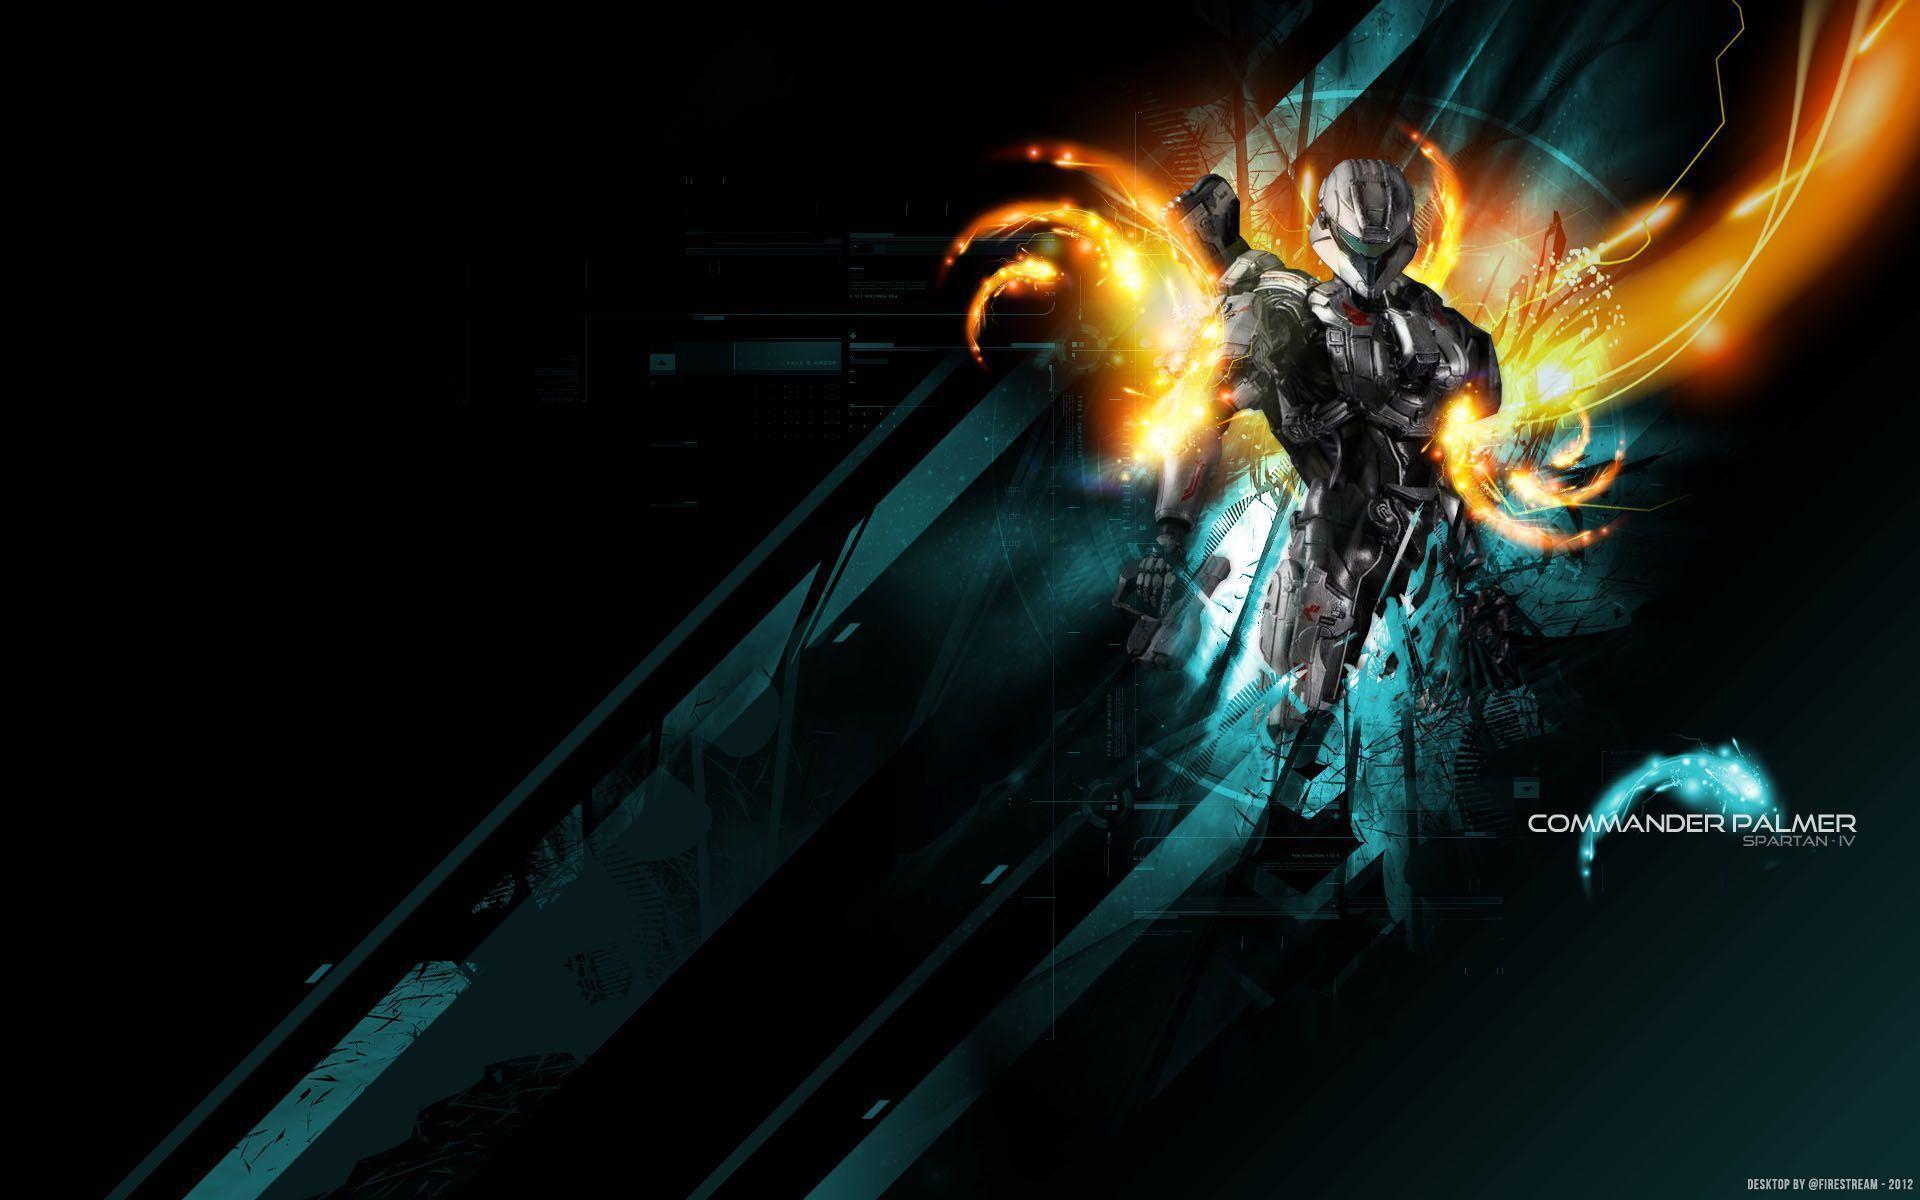 Cool Halo 4 Wallpapers - Wallpaper Cave